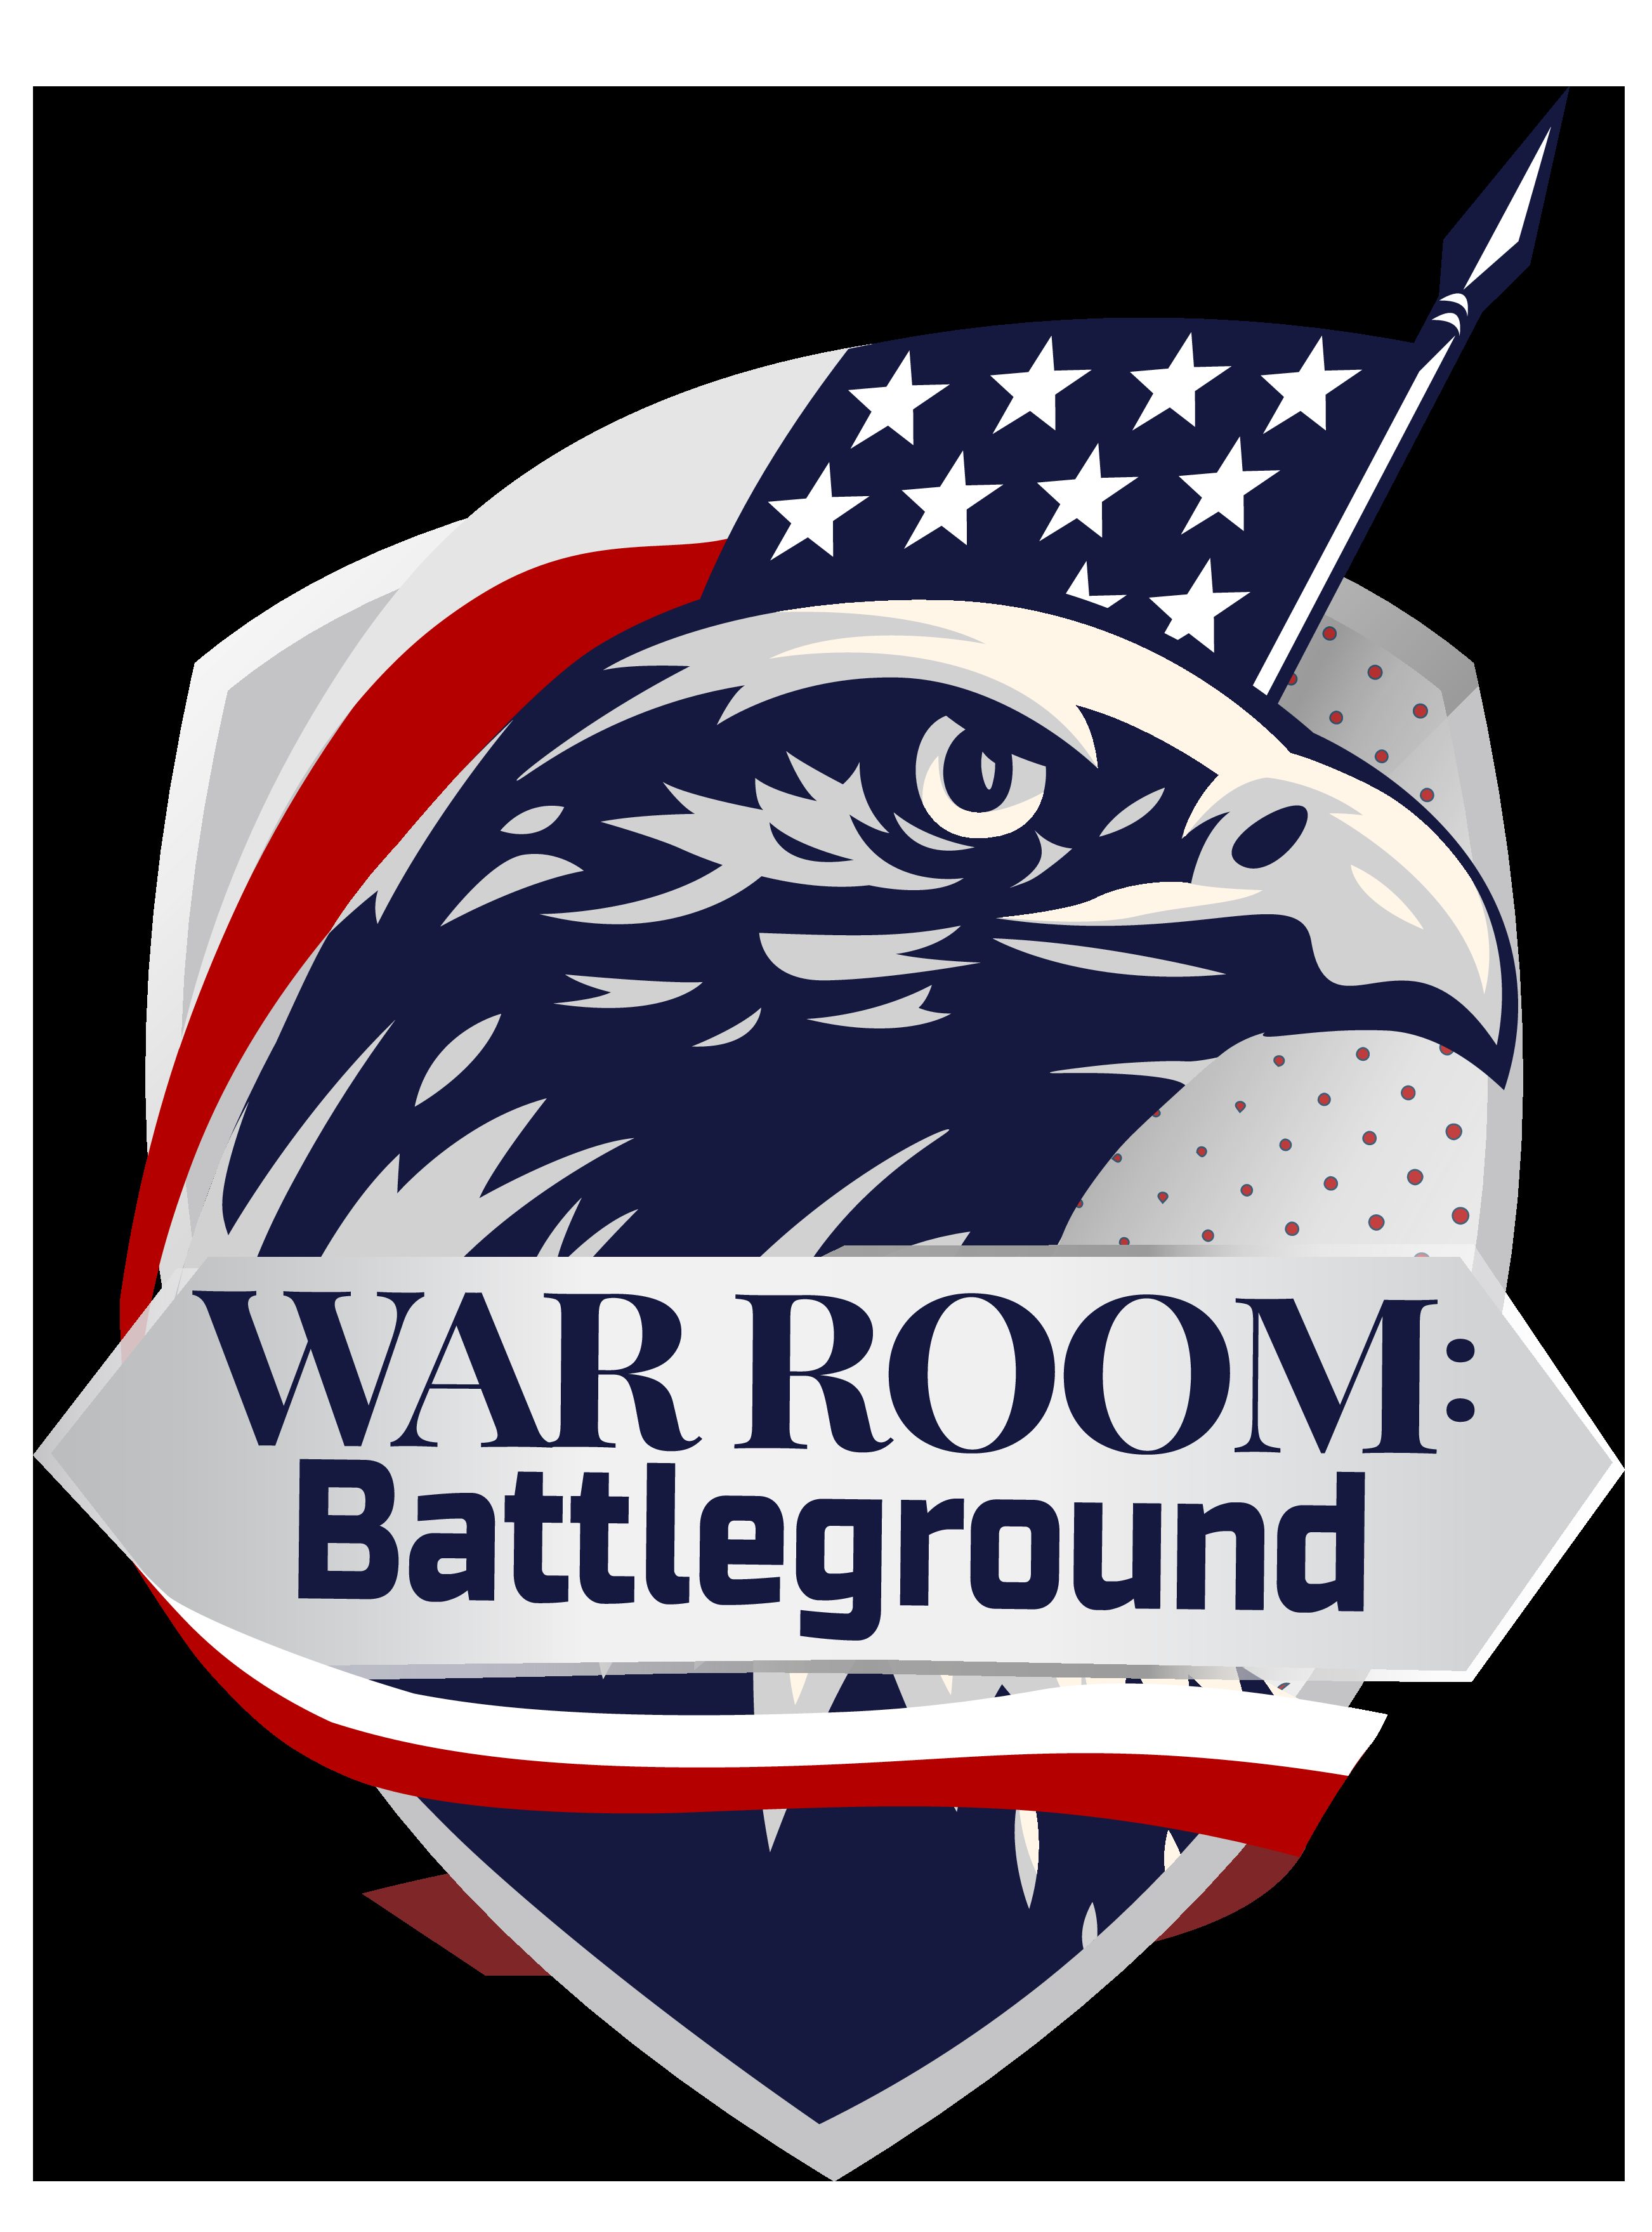 WarRoom Battleground EP 255: The Total Meltdown Of Our Banking System